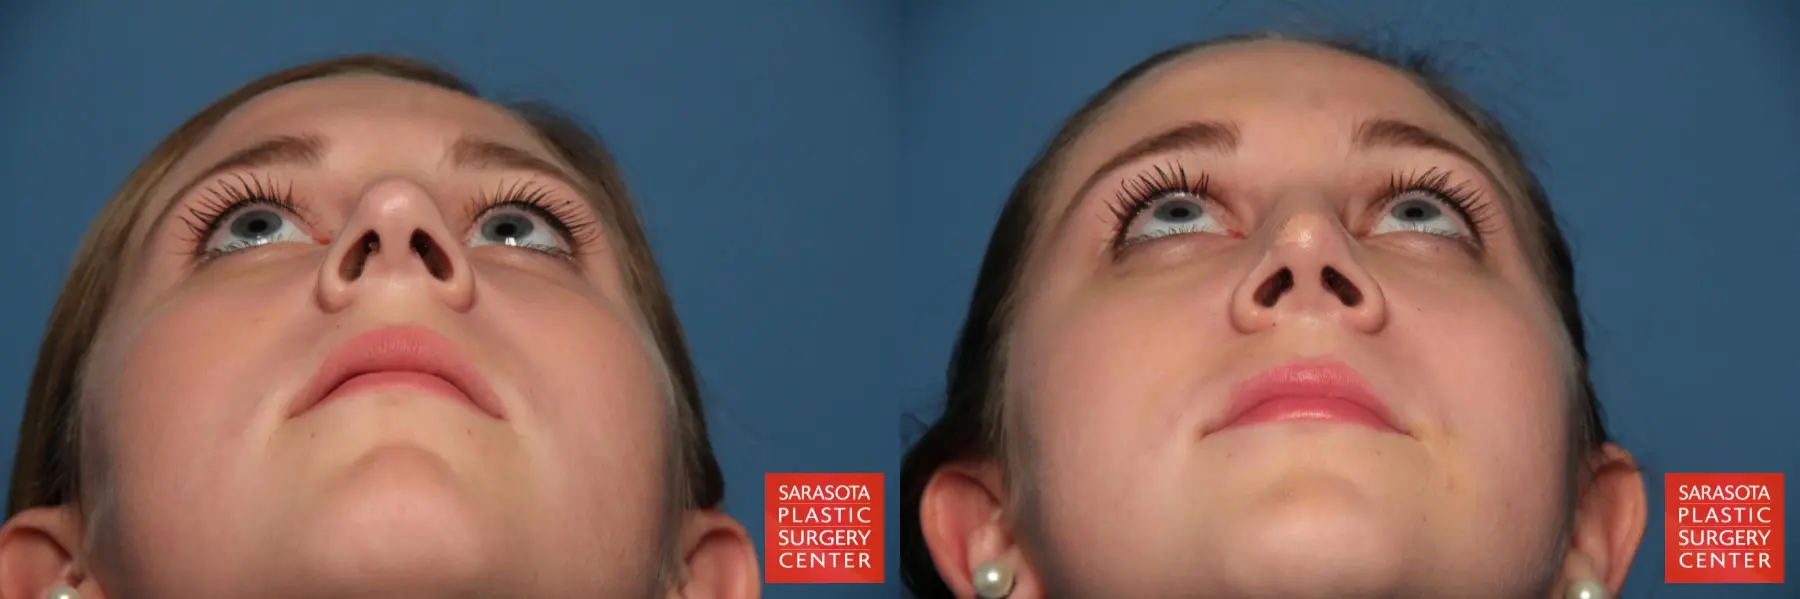 Rhinoplasty: Patient 9 - Before and After 6